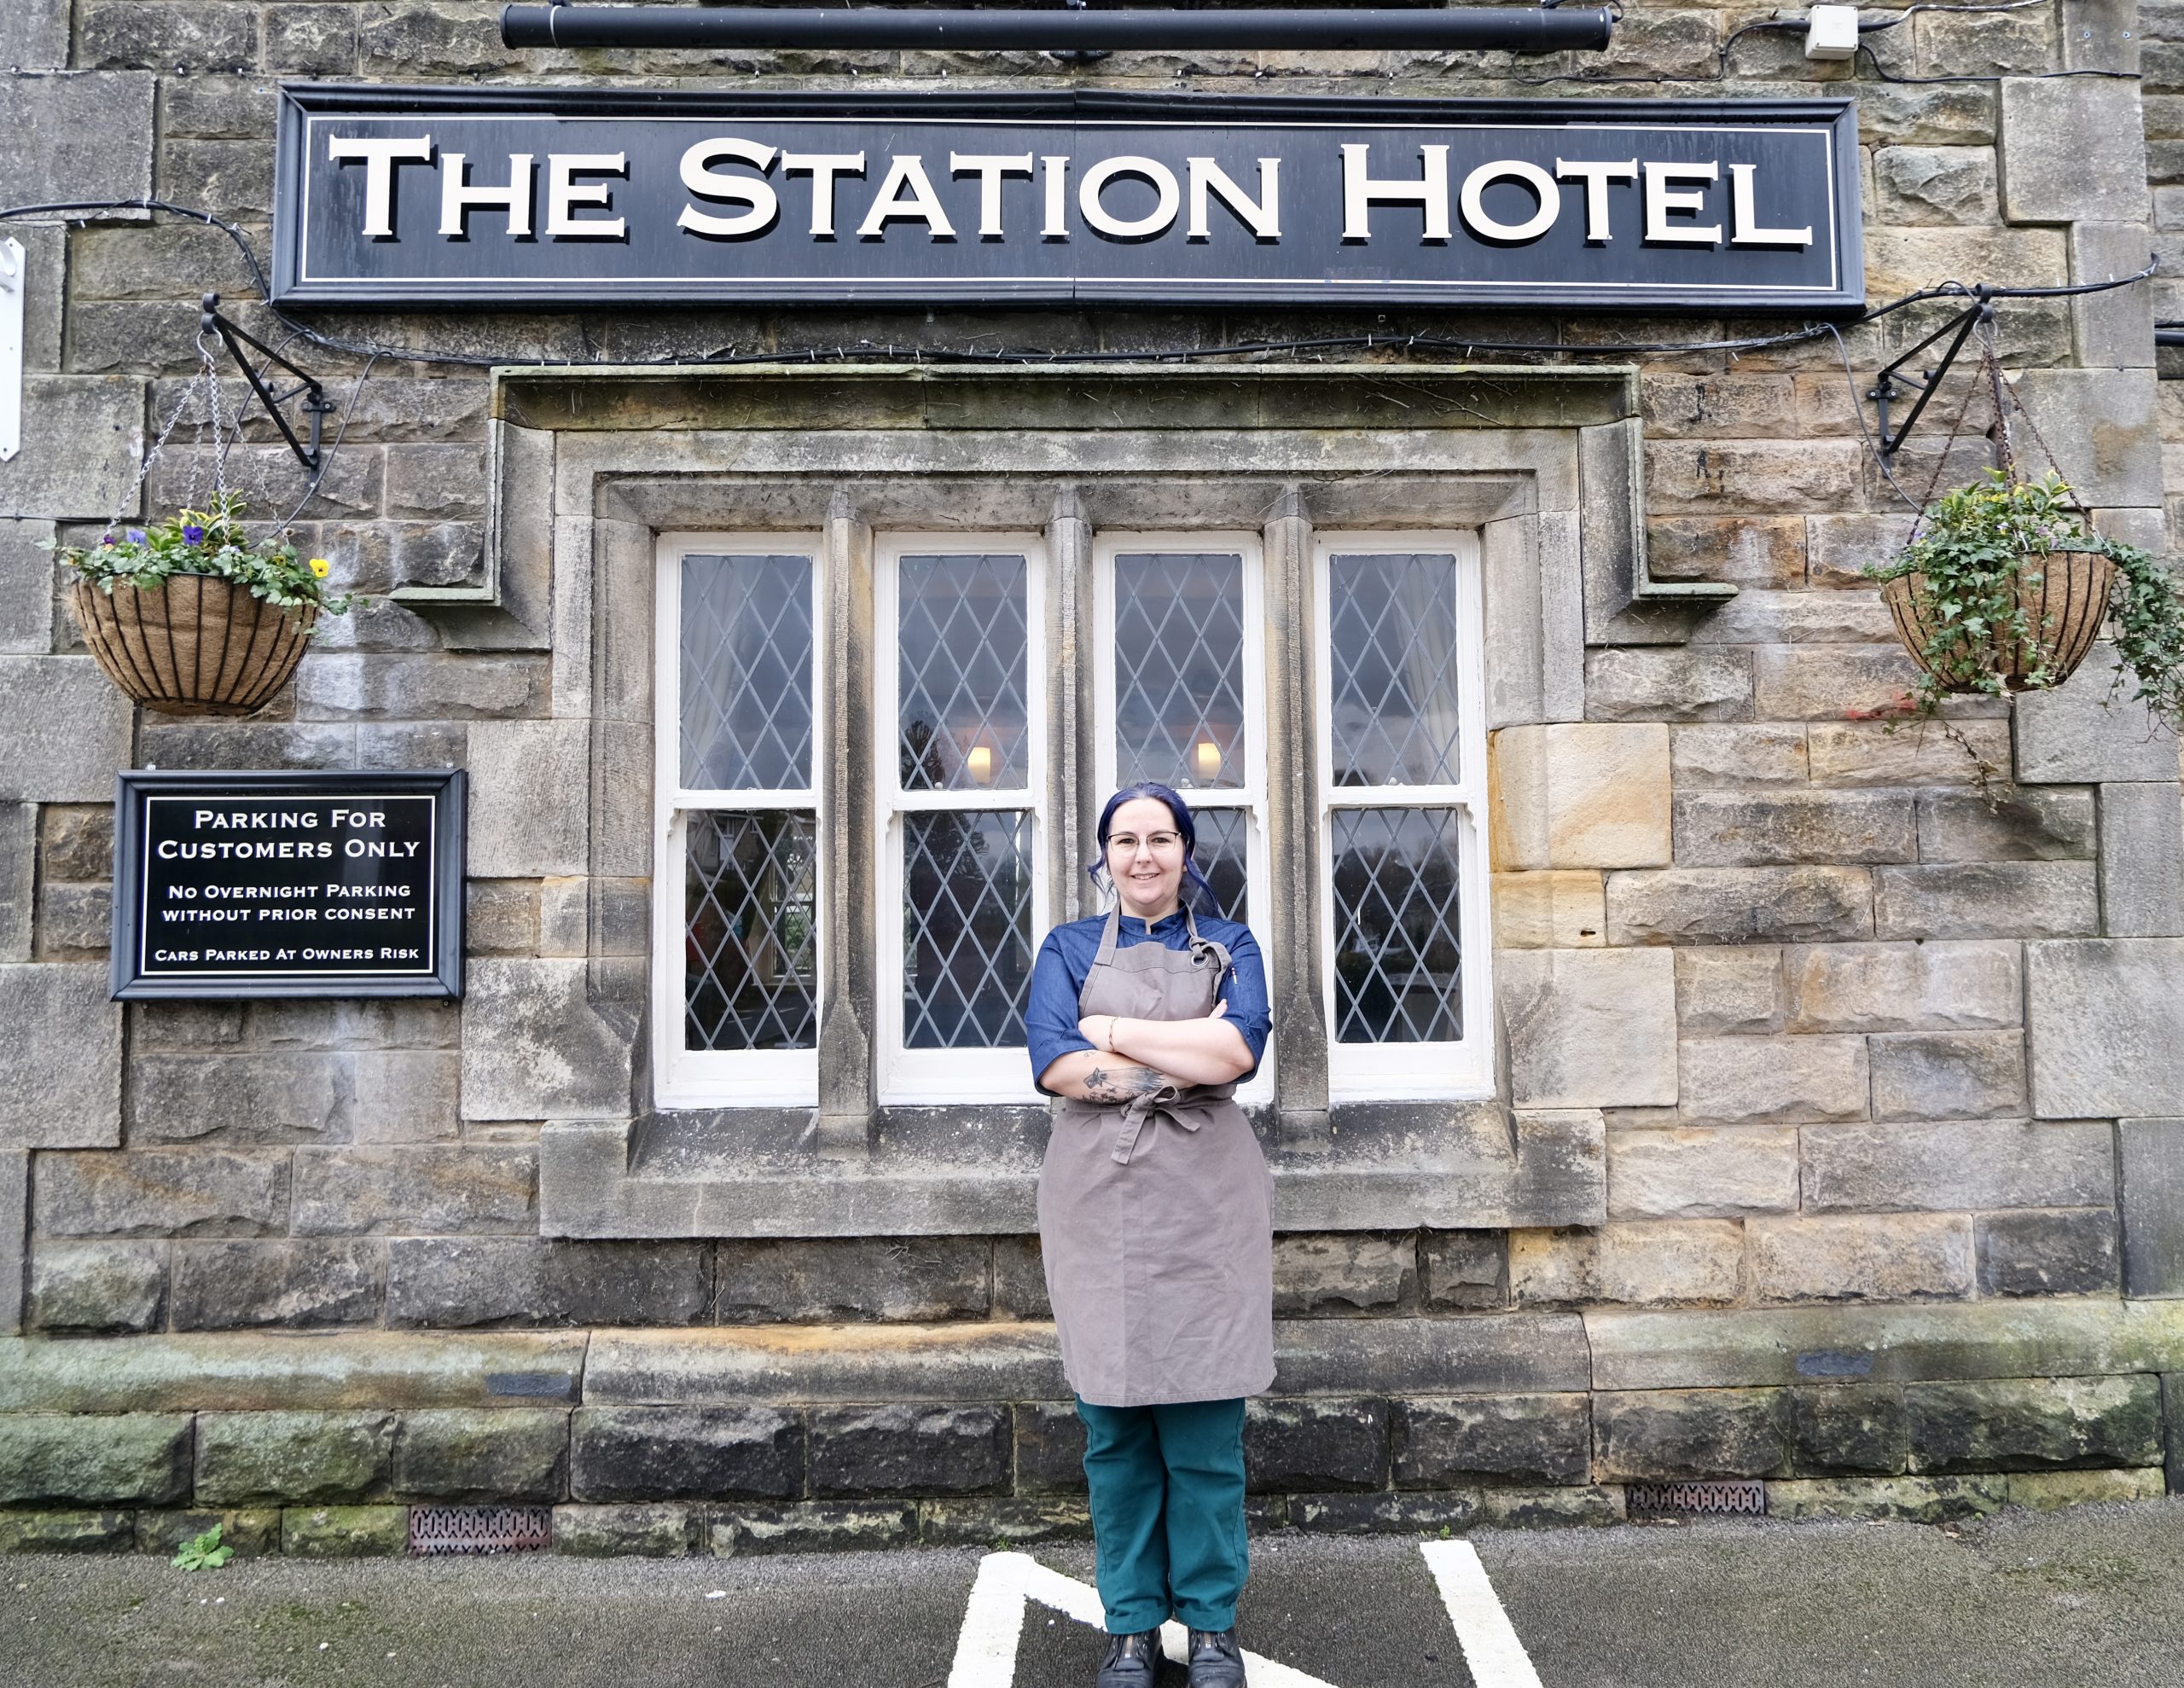 From Beyoncé to Birstwith – meet the new chef at The Station Hotel